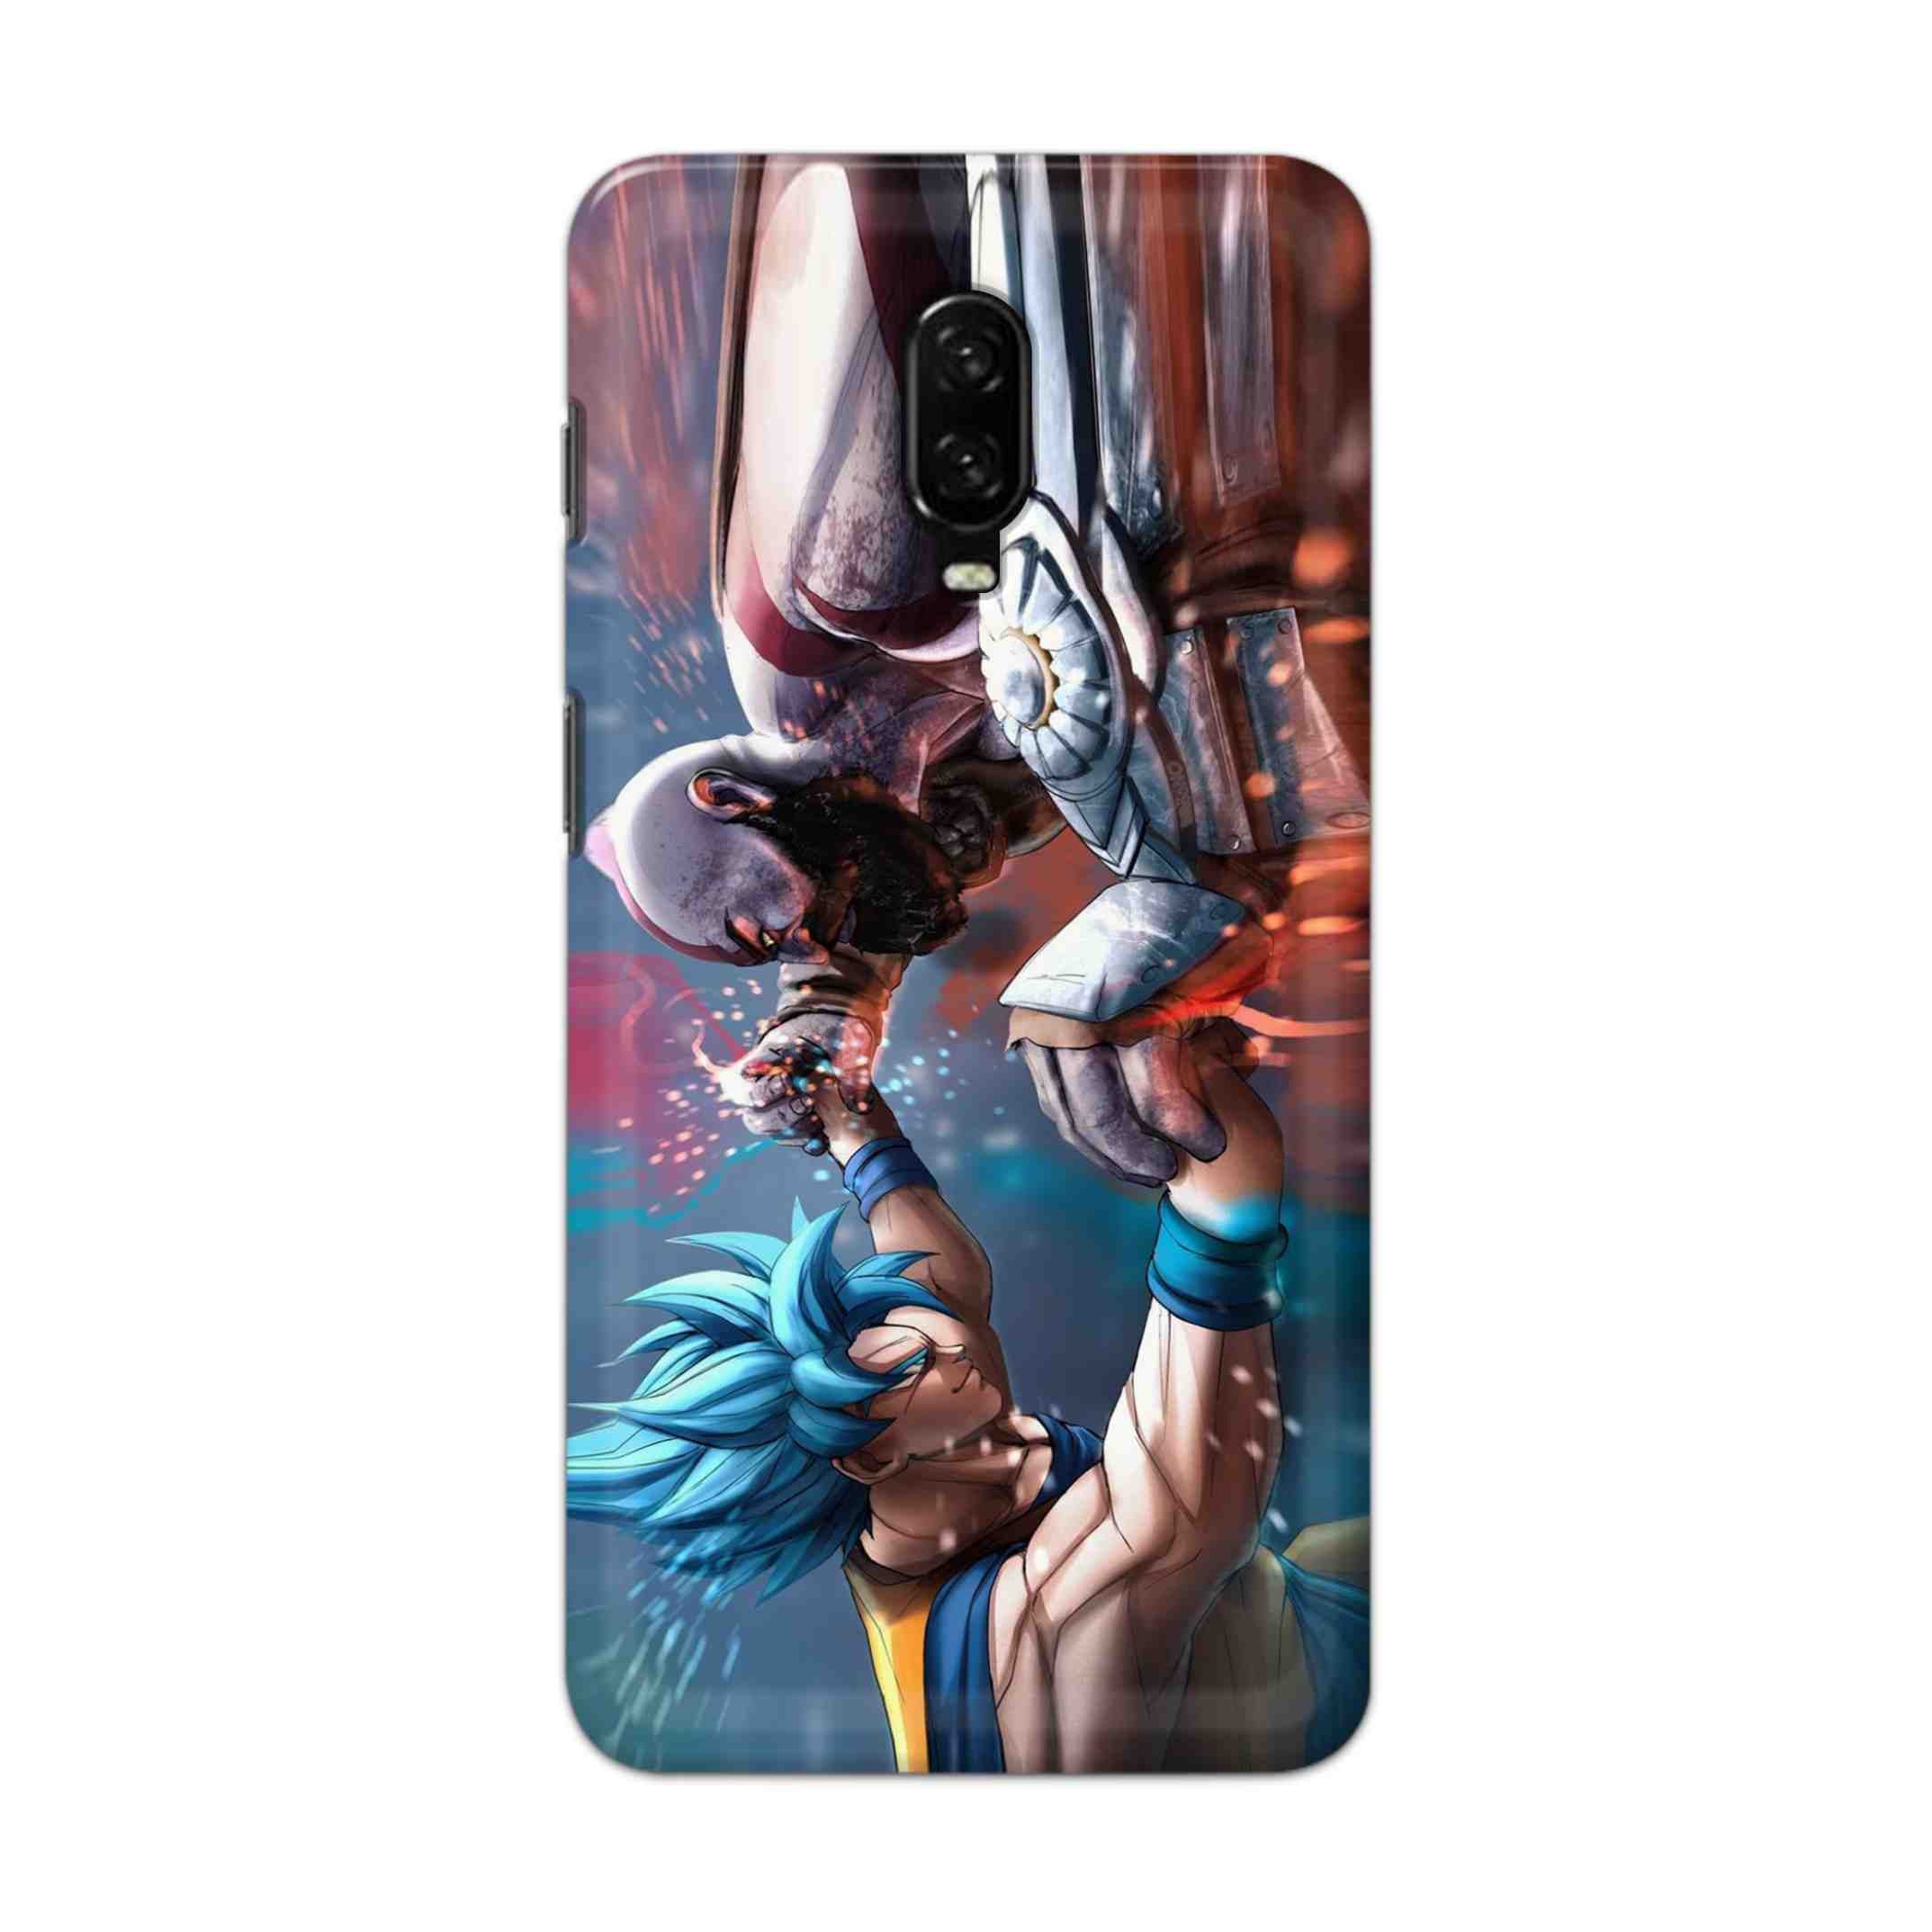 Buy Goku Vs Kratos Hard Back Mobile Phone Case Cover For OnePlus 6T Online